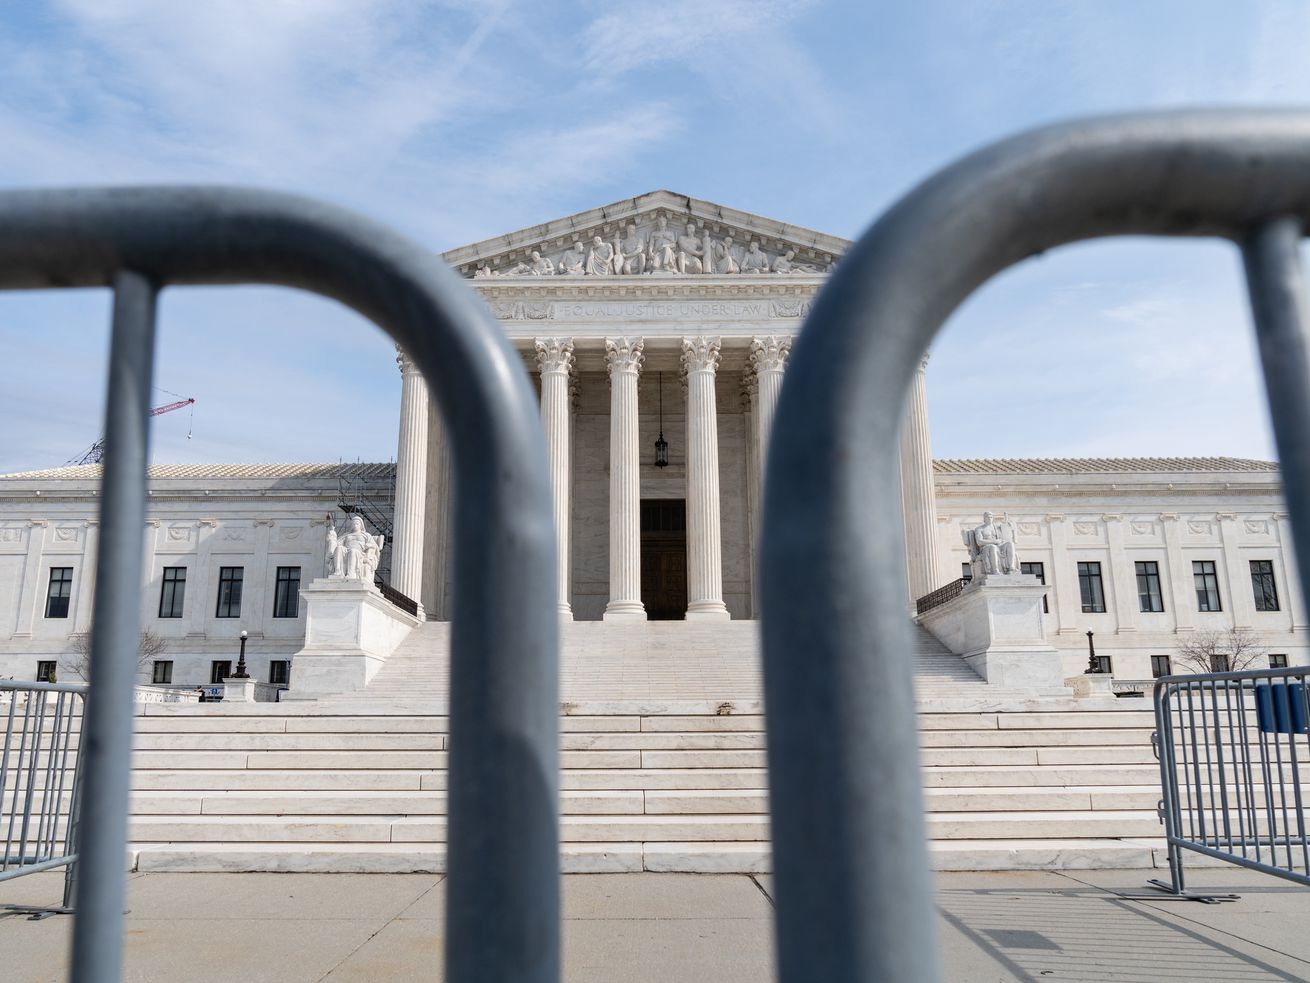 The US Supreme Court building exterior, seen from behind barricades.